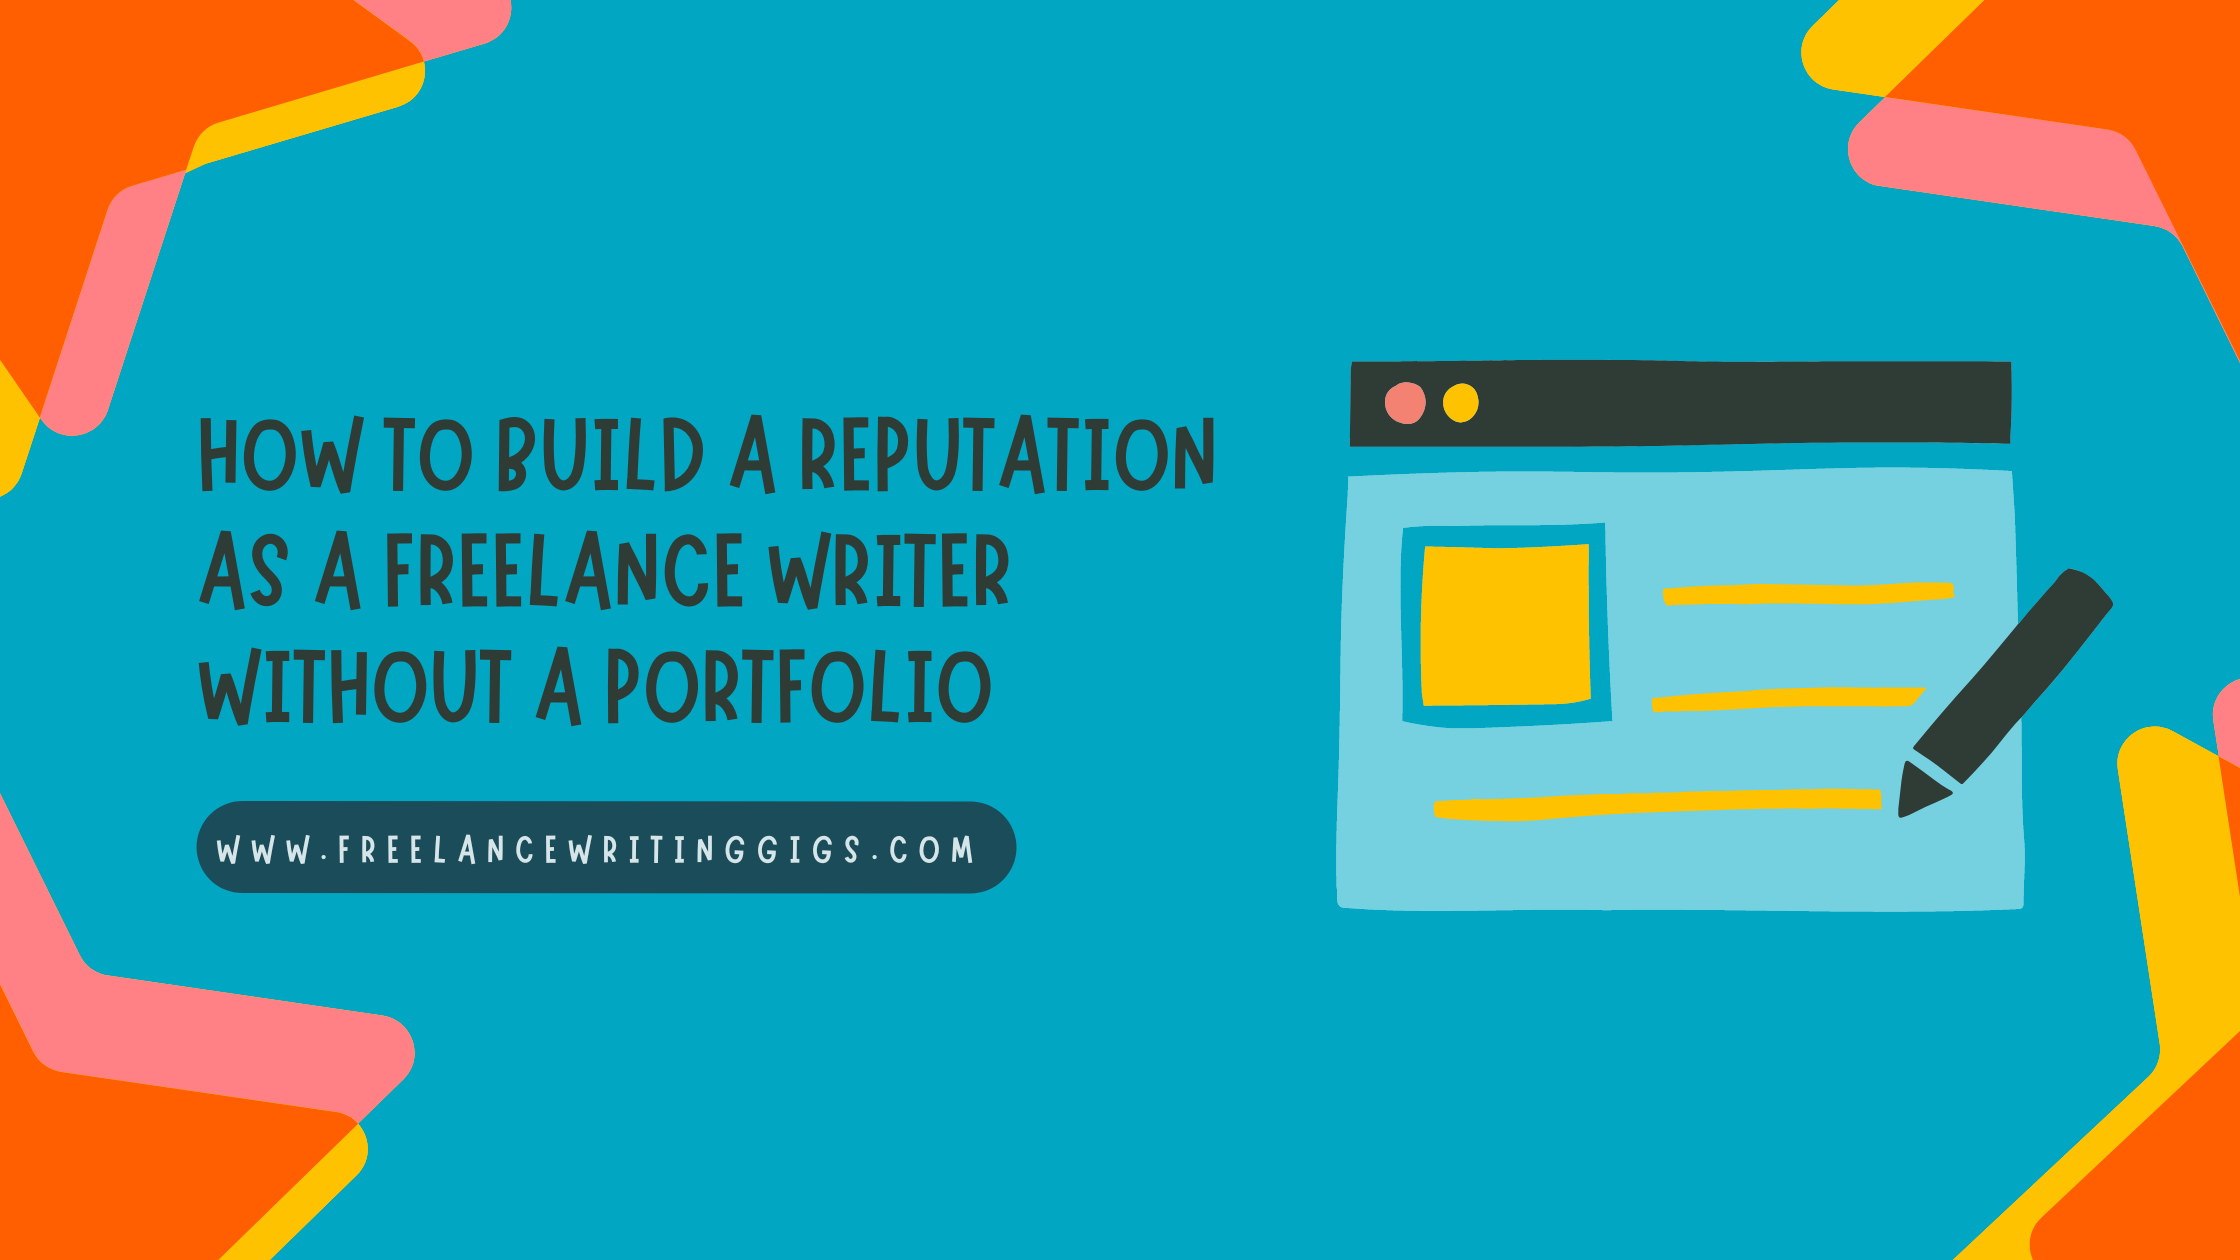 How to Build a Reputation as a Freelance Writer Without a Portfolio